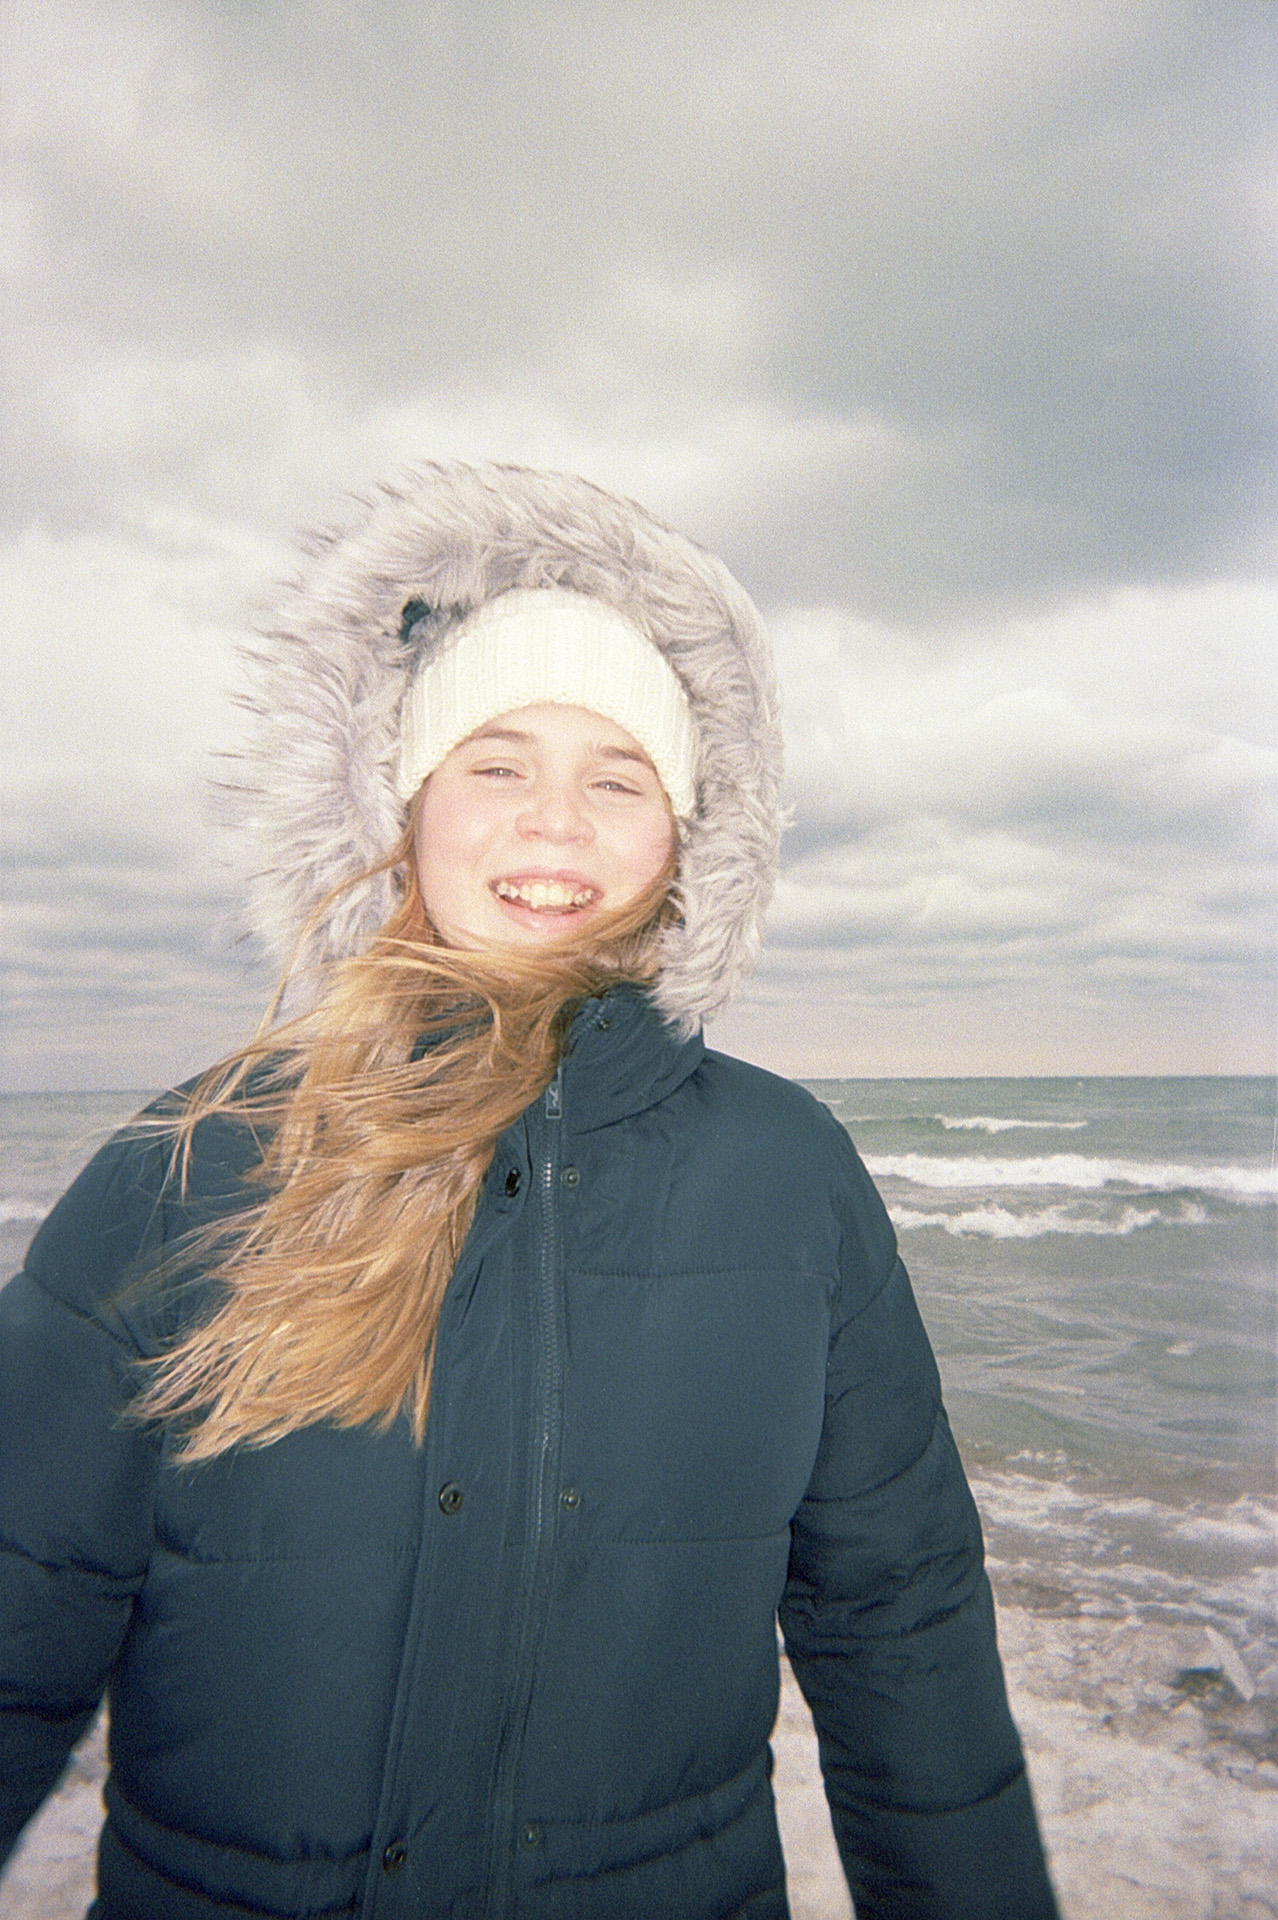 Eden laughing with her teeth showing. She is wearing her winter jacket with a fur hood pulled up. There are waves from Lake Ontario in the background.